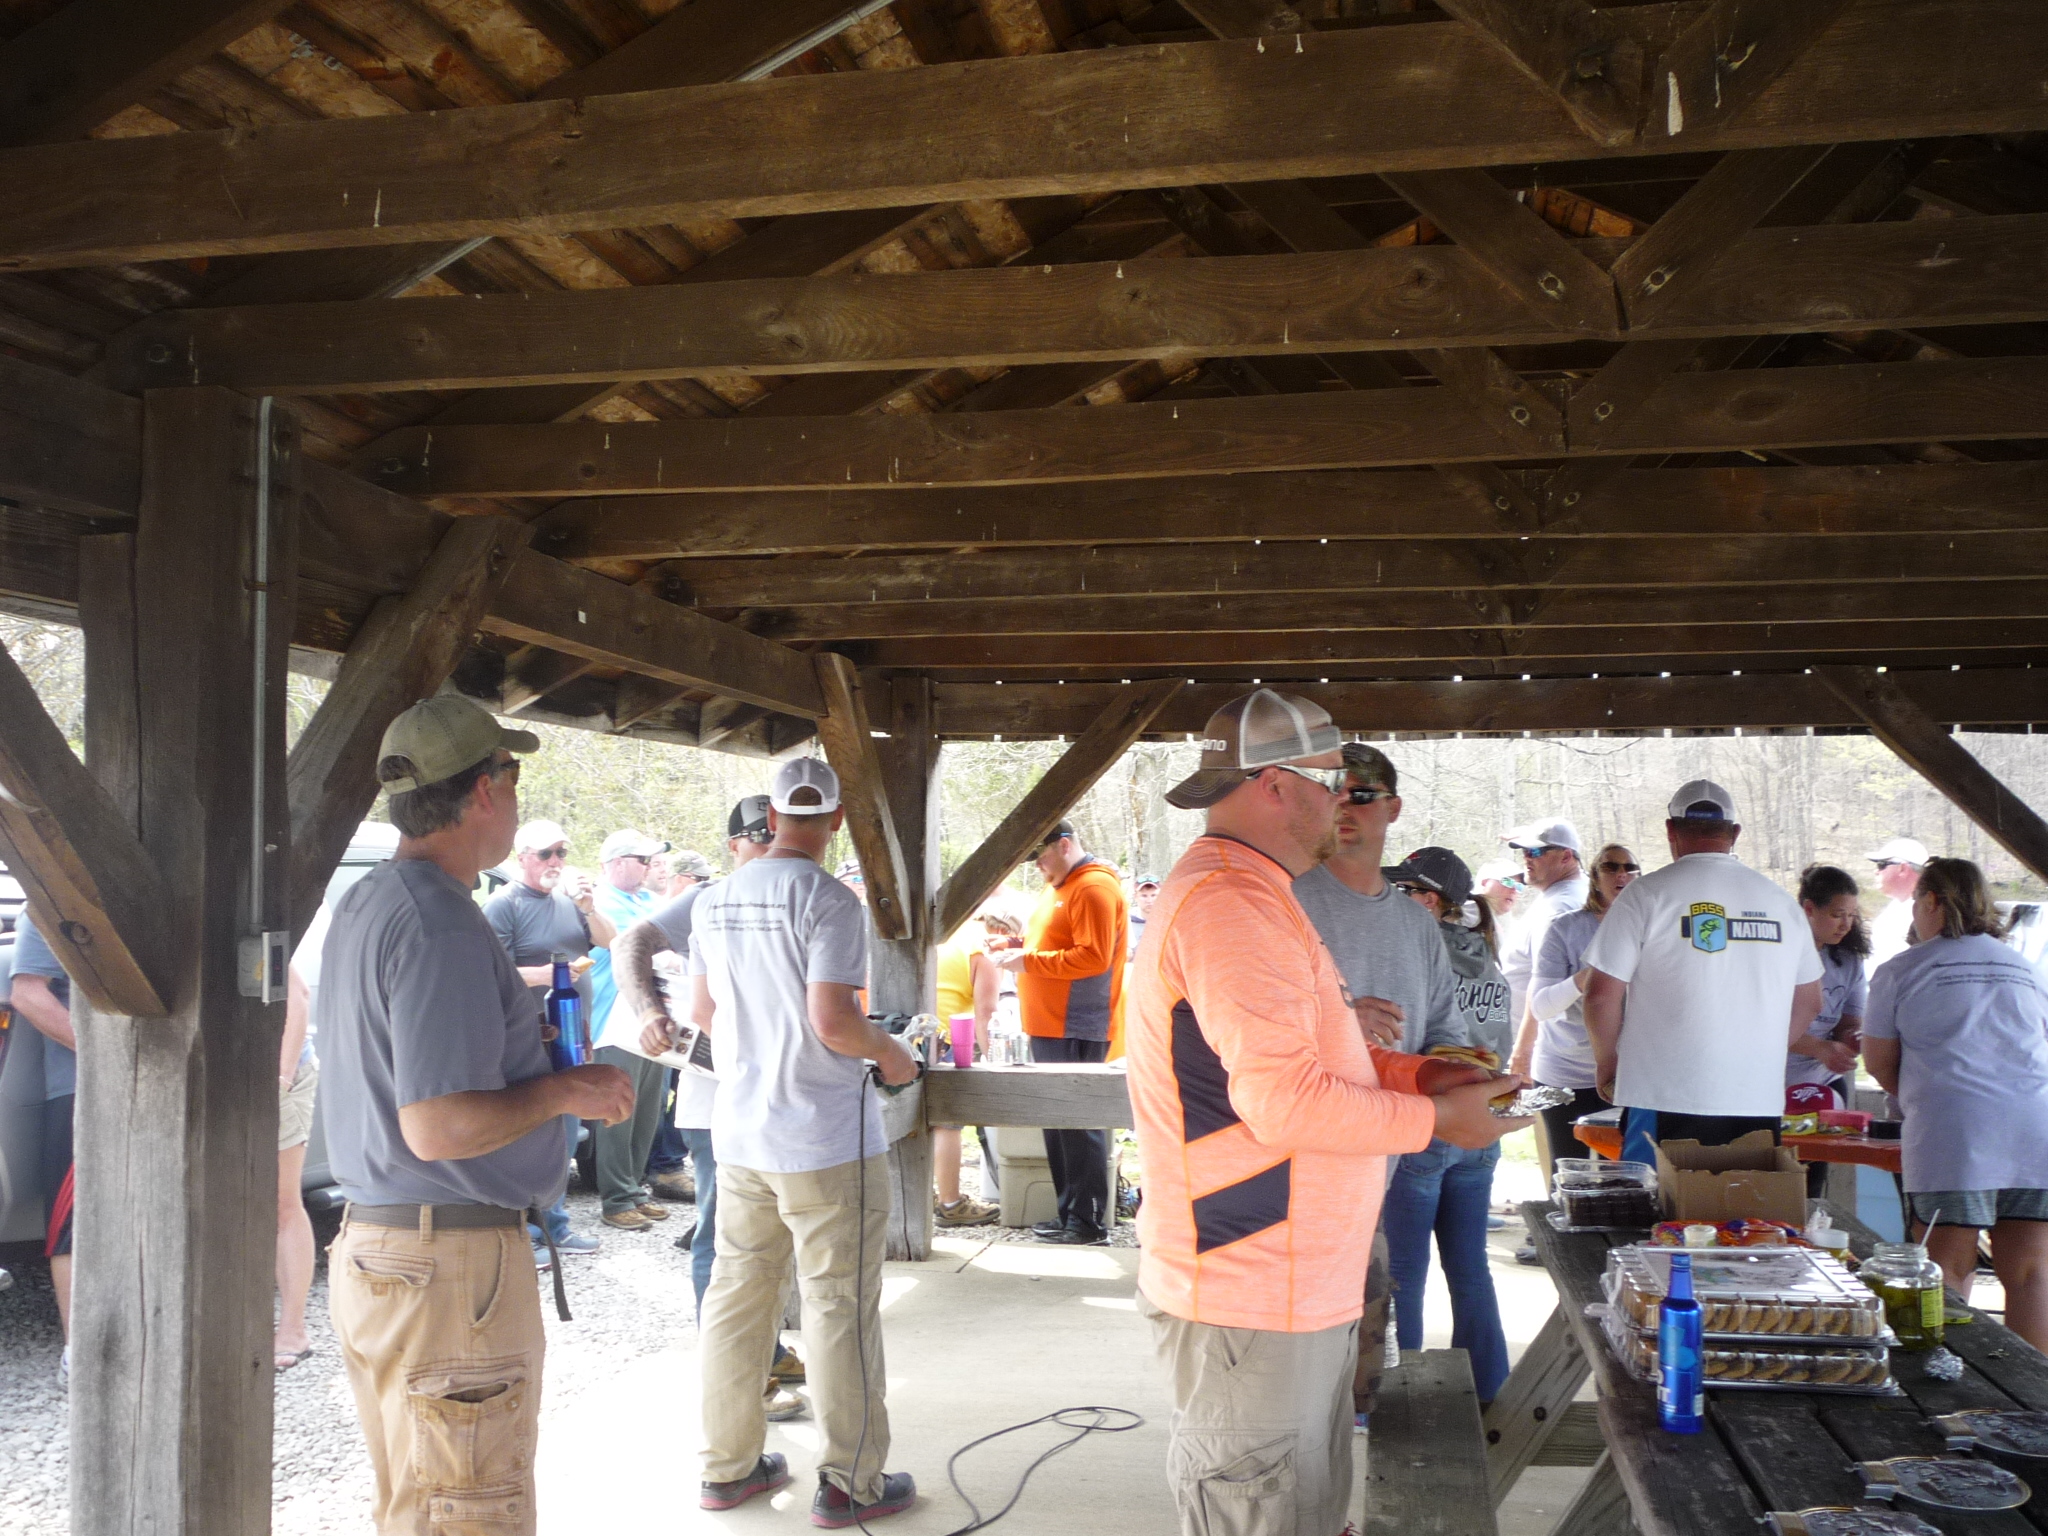 Gathering of people around picnic tables at bass tournament.